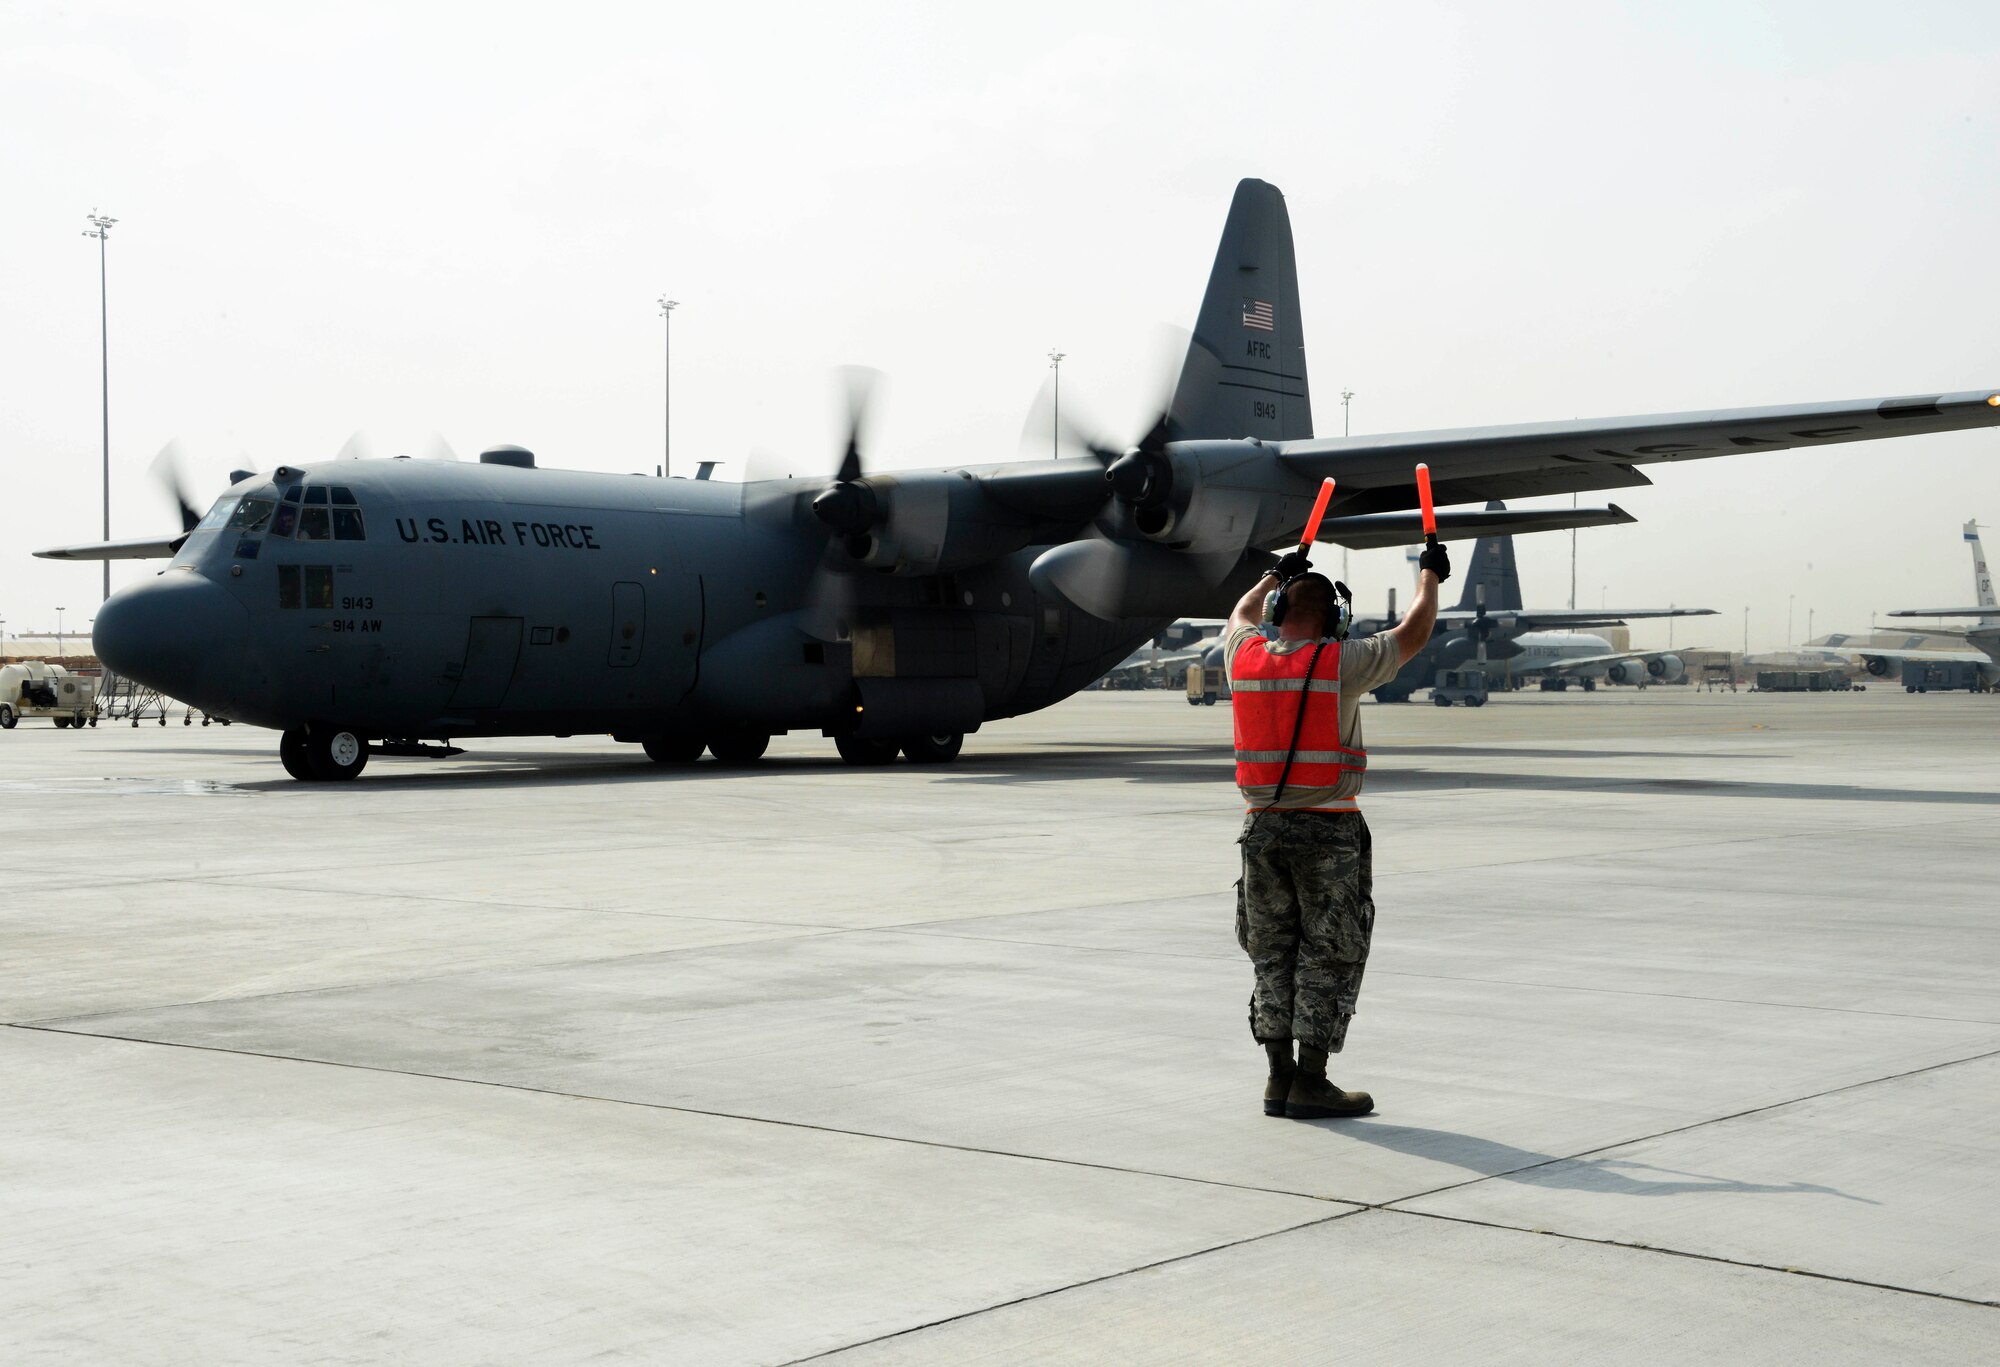 Senior Airman Steven Engels, 379th Expeditionary Aircraft Maintenance Squadron crew chief, marshals a C-130 Hercules on the flight line June 28, 2016, at Al Udeid Air Base, Qatar. Airmen from the 379th EAMXS are responsible for ensuring the aircraft are maintained to exact standards to support Operation Inherent Resolve and Operations Freedom’s Sentinel. (U.S. Air Force photo/Senior Airman Janelle Patiño/Released)